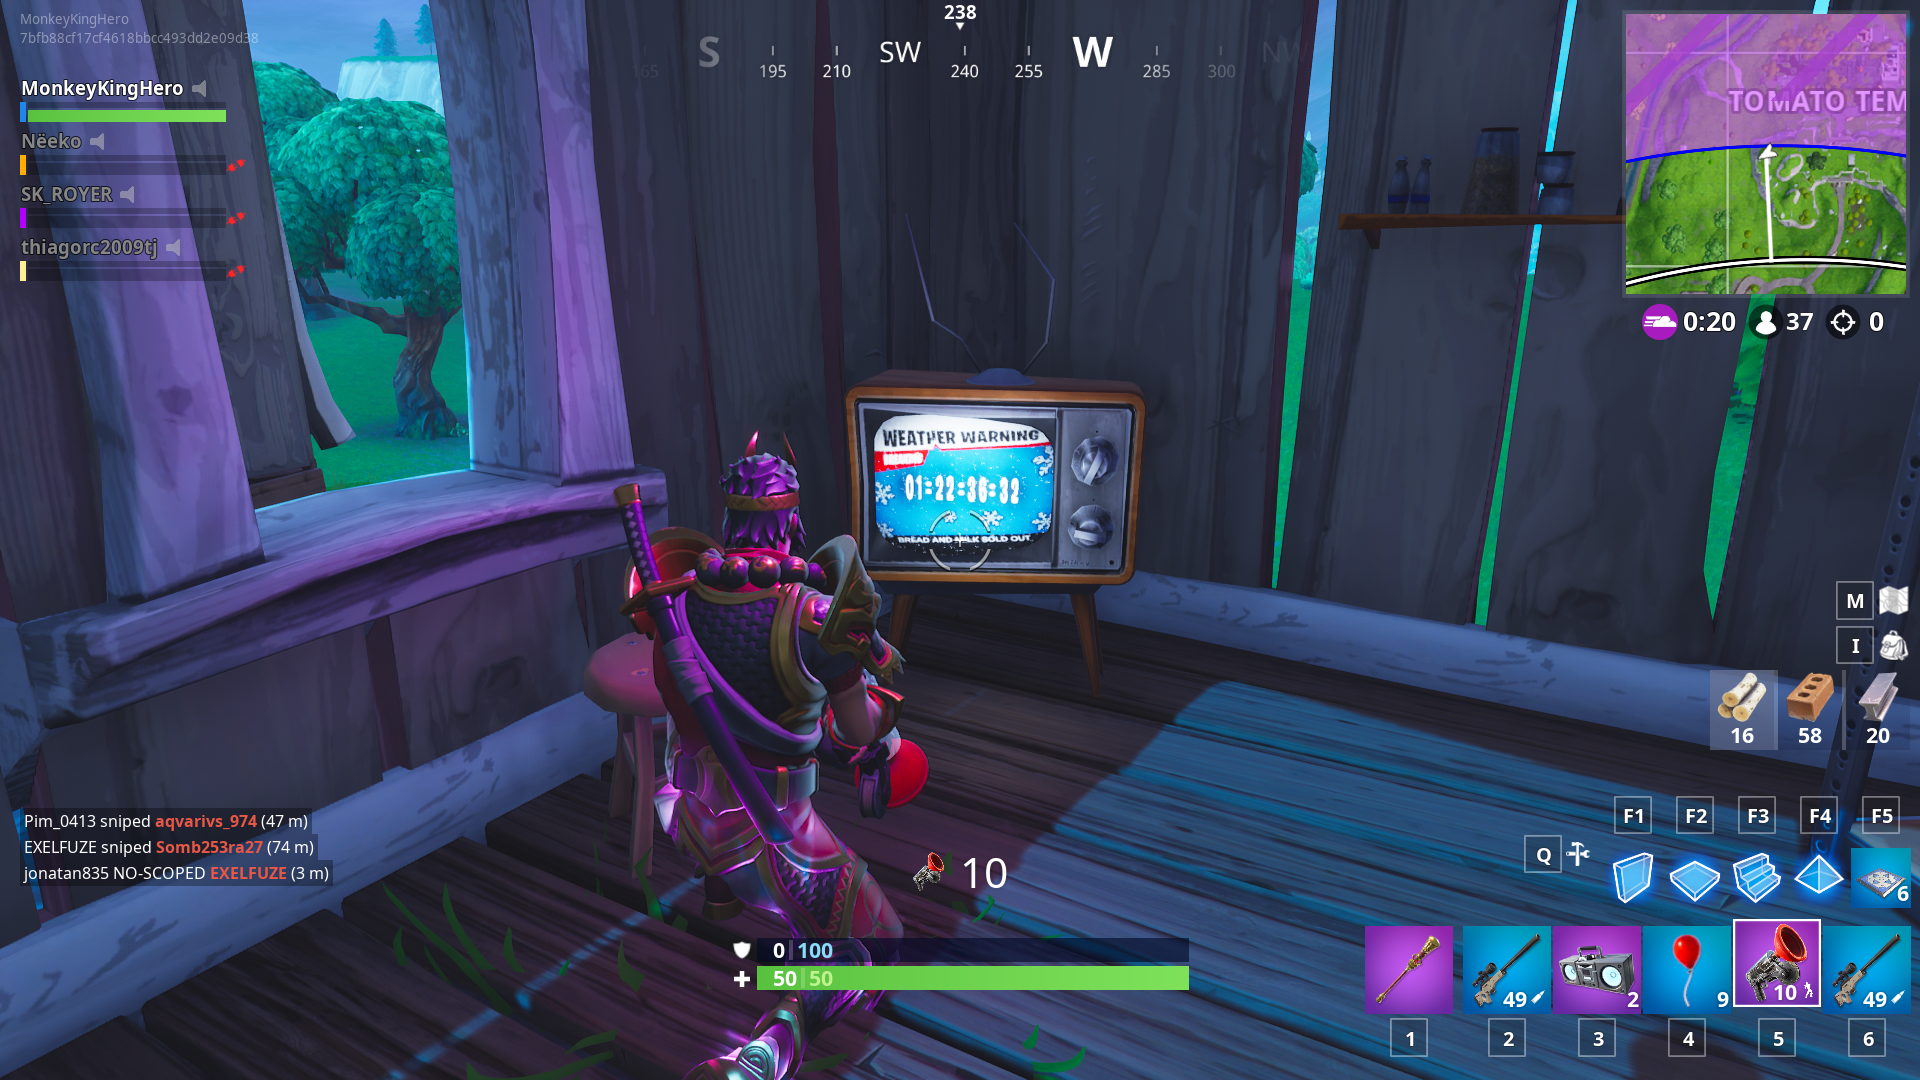 Fortnite Tvs Now Have A Countdown For A Potential Winter Storm Dot - fortnite tvs now have a countdown for a potential winter storm